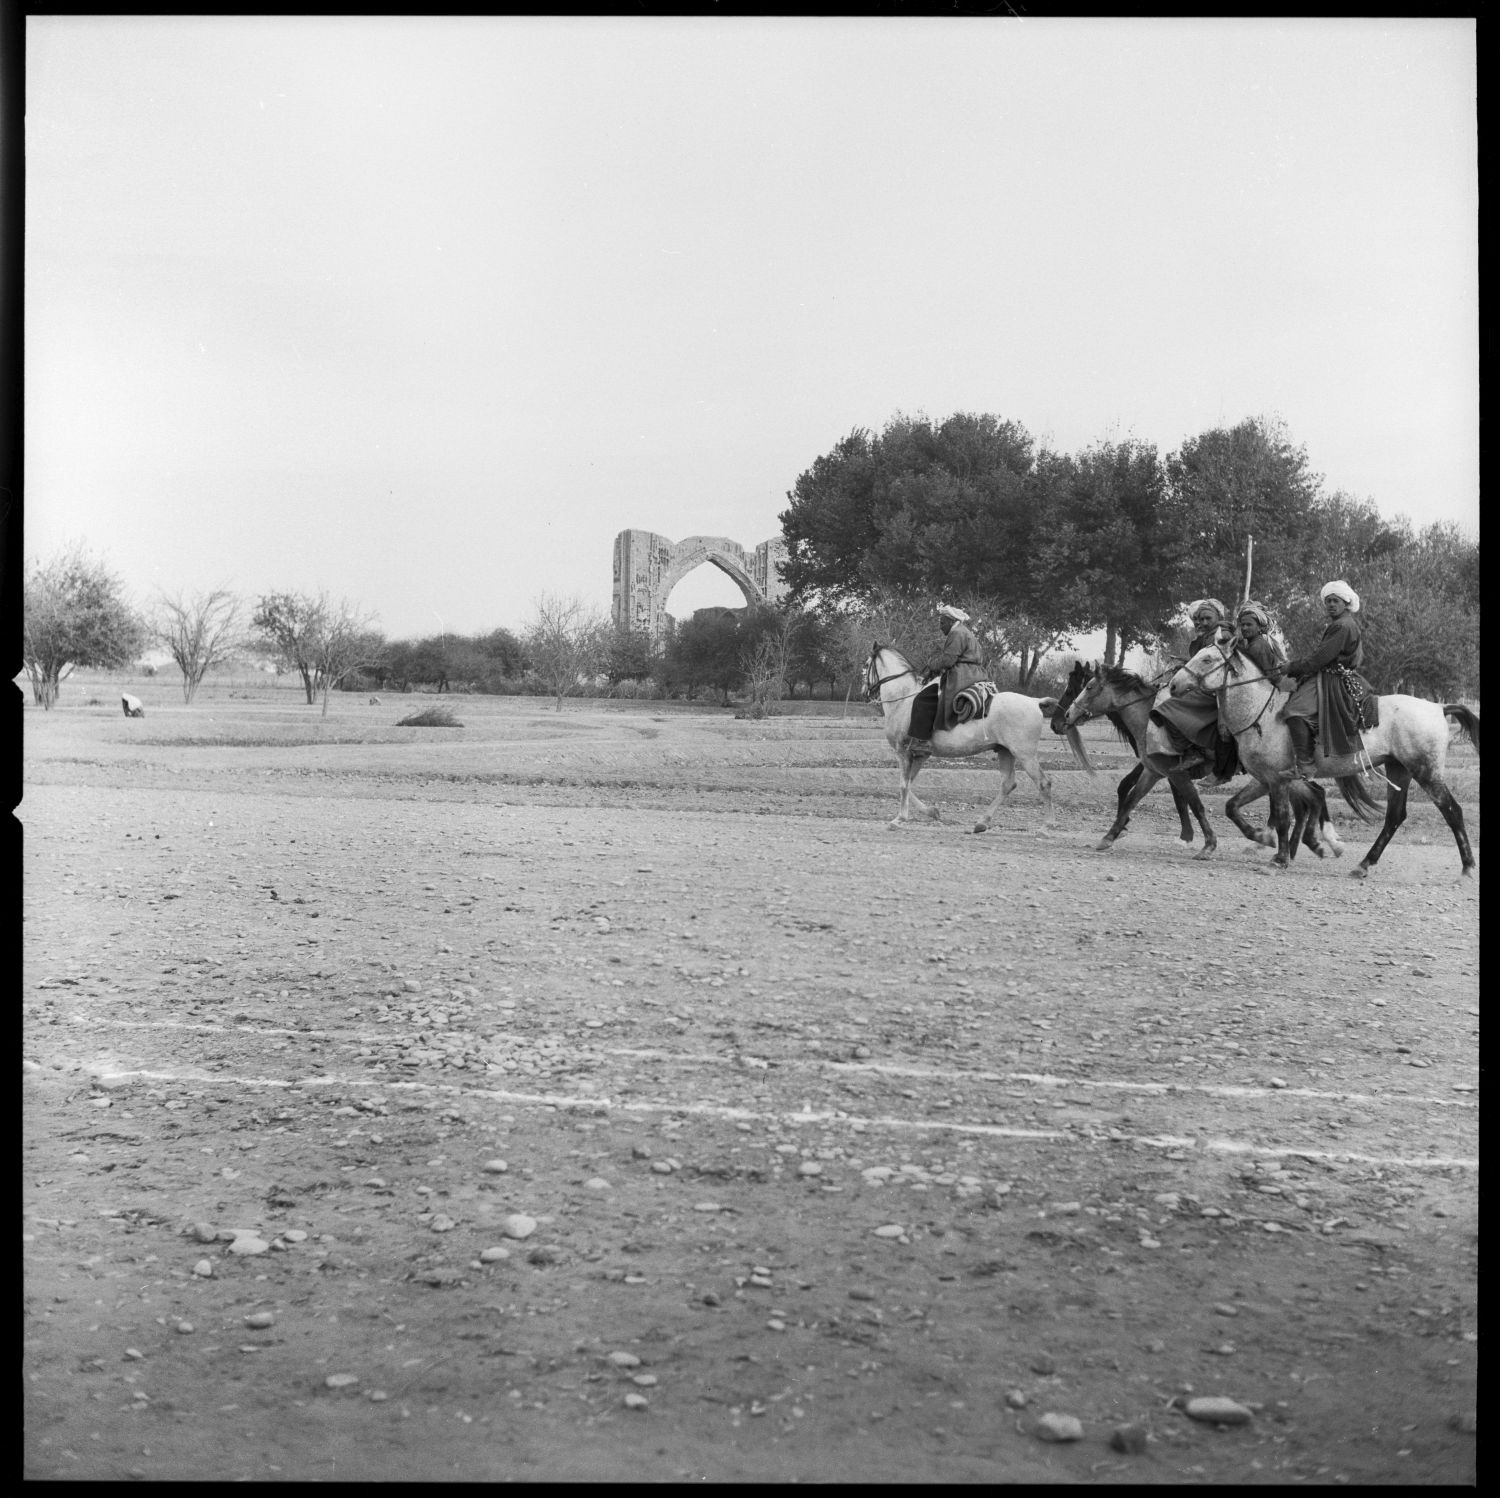 General distant view with men on horses passing in foreground.